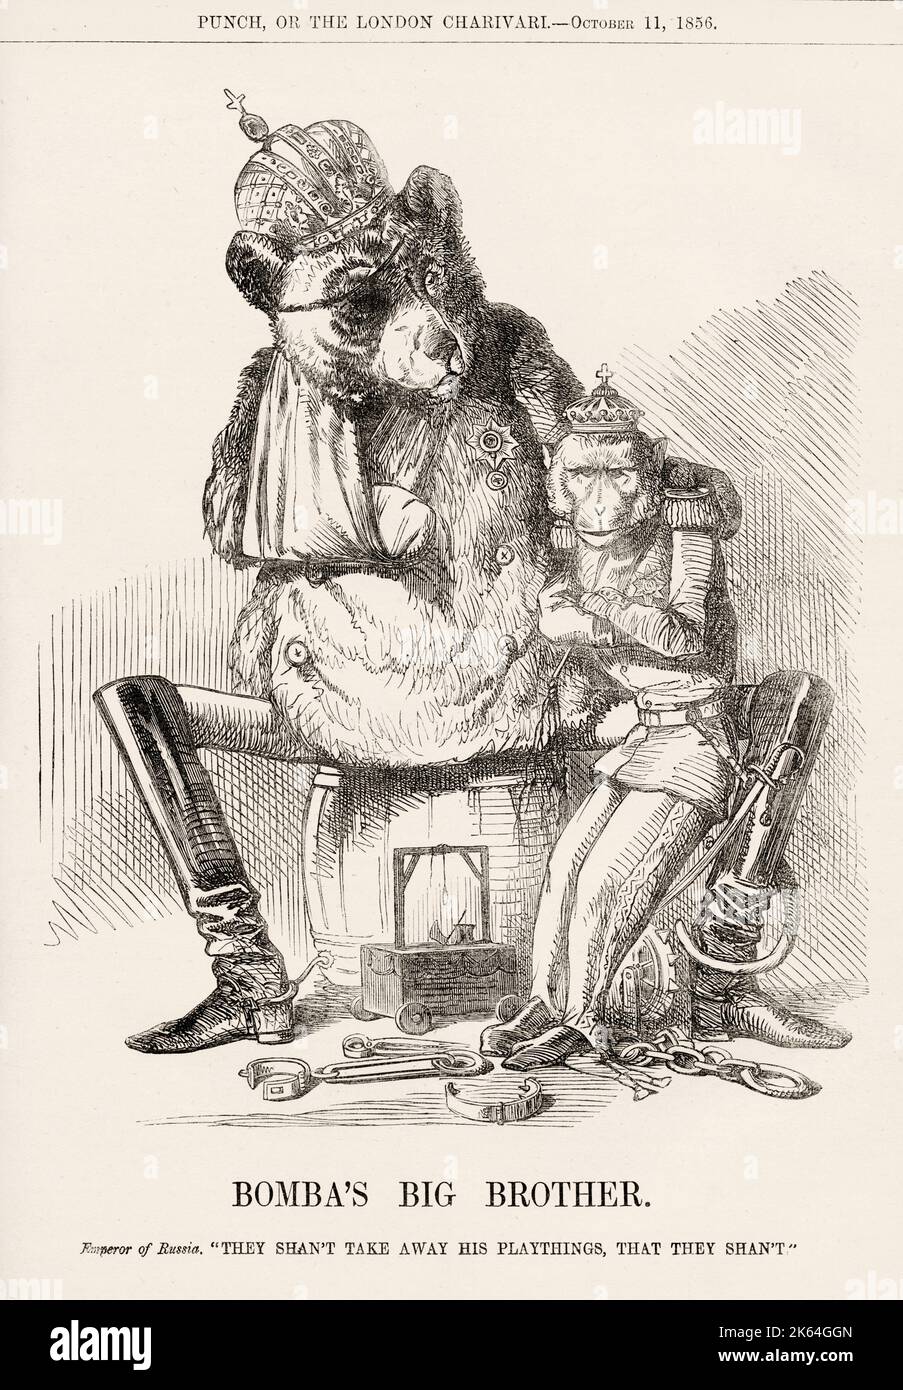 Bomba's Big Brother. Emperor of Russia: 'They shan't take away his playthings, that they shan't.' Ferdinand II (1810-1859), King of the Two Sicilies, depicted as a monkey sitting on the knee of the Russian bear.     Date: 1856 Stock Photo